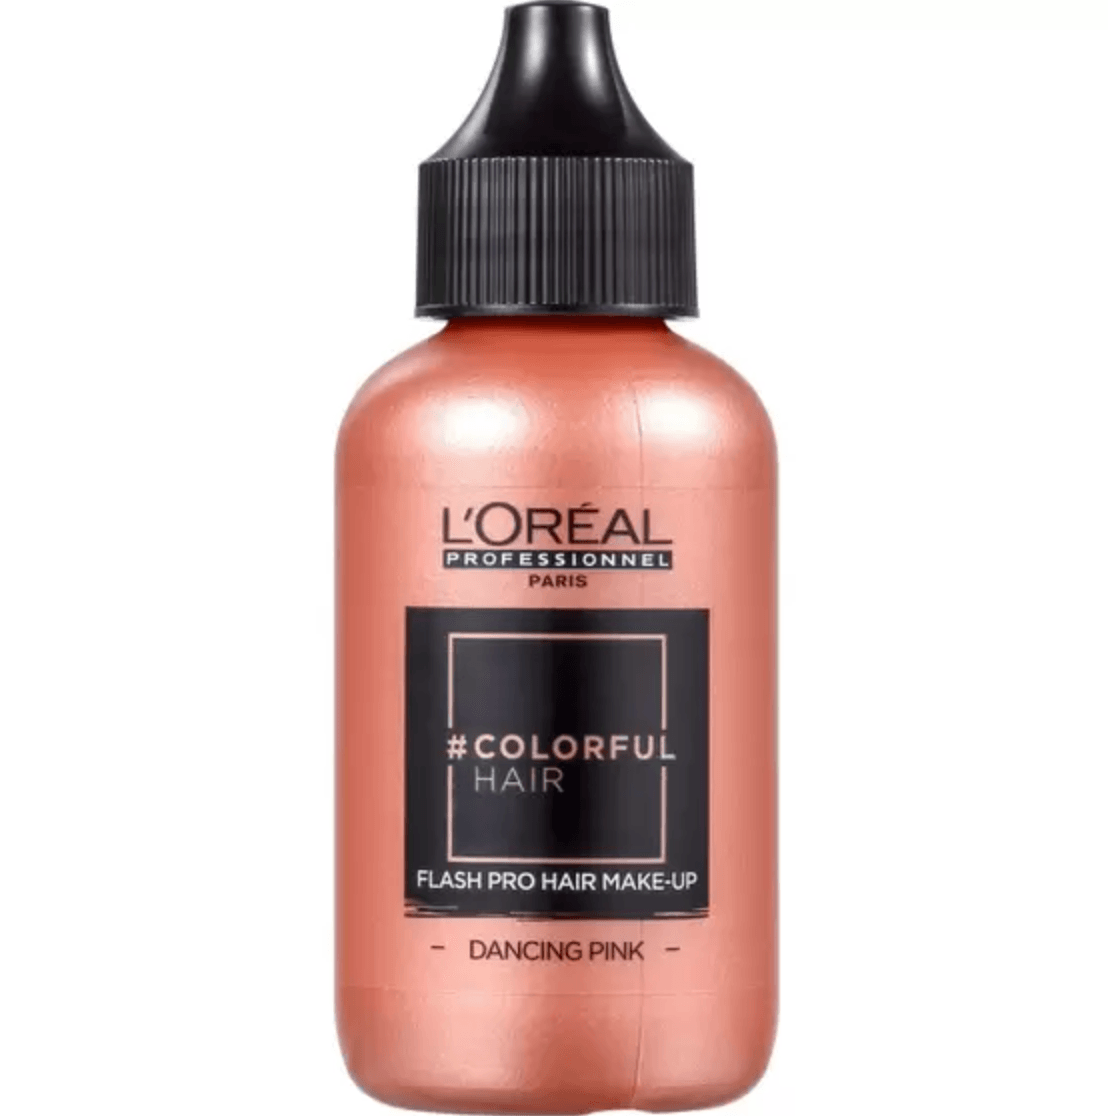 L’OREAL PROFESSIONAL #COLORFUL HAIR - DANCING PINK - GLITTER 60 ML - www.indiancart.com.au - Hair Color - - Loreal